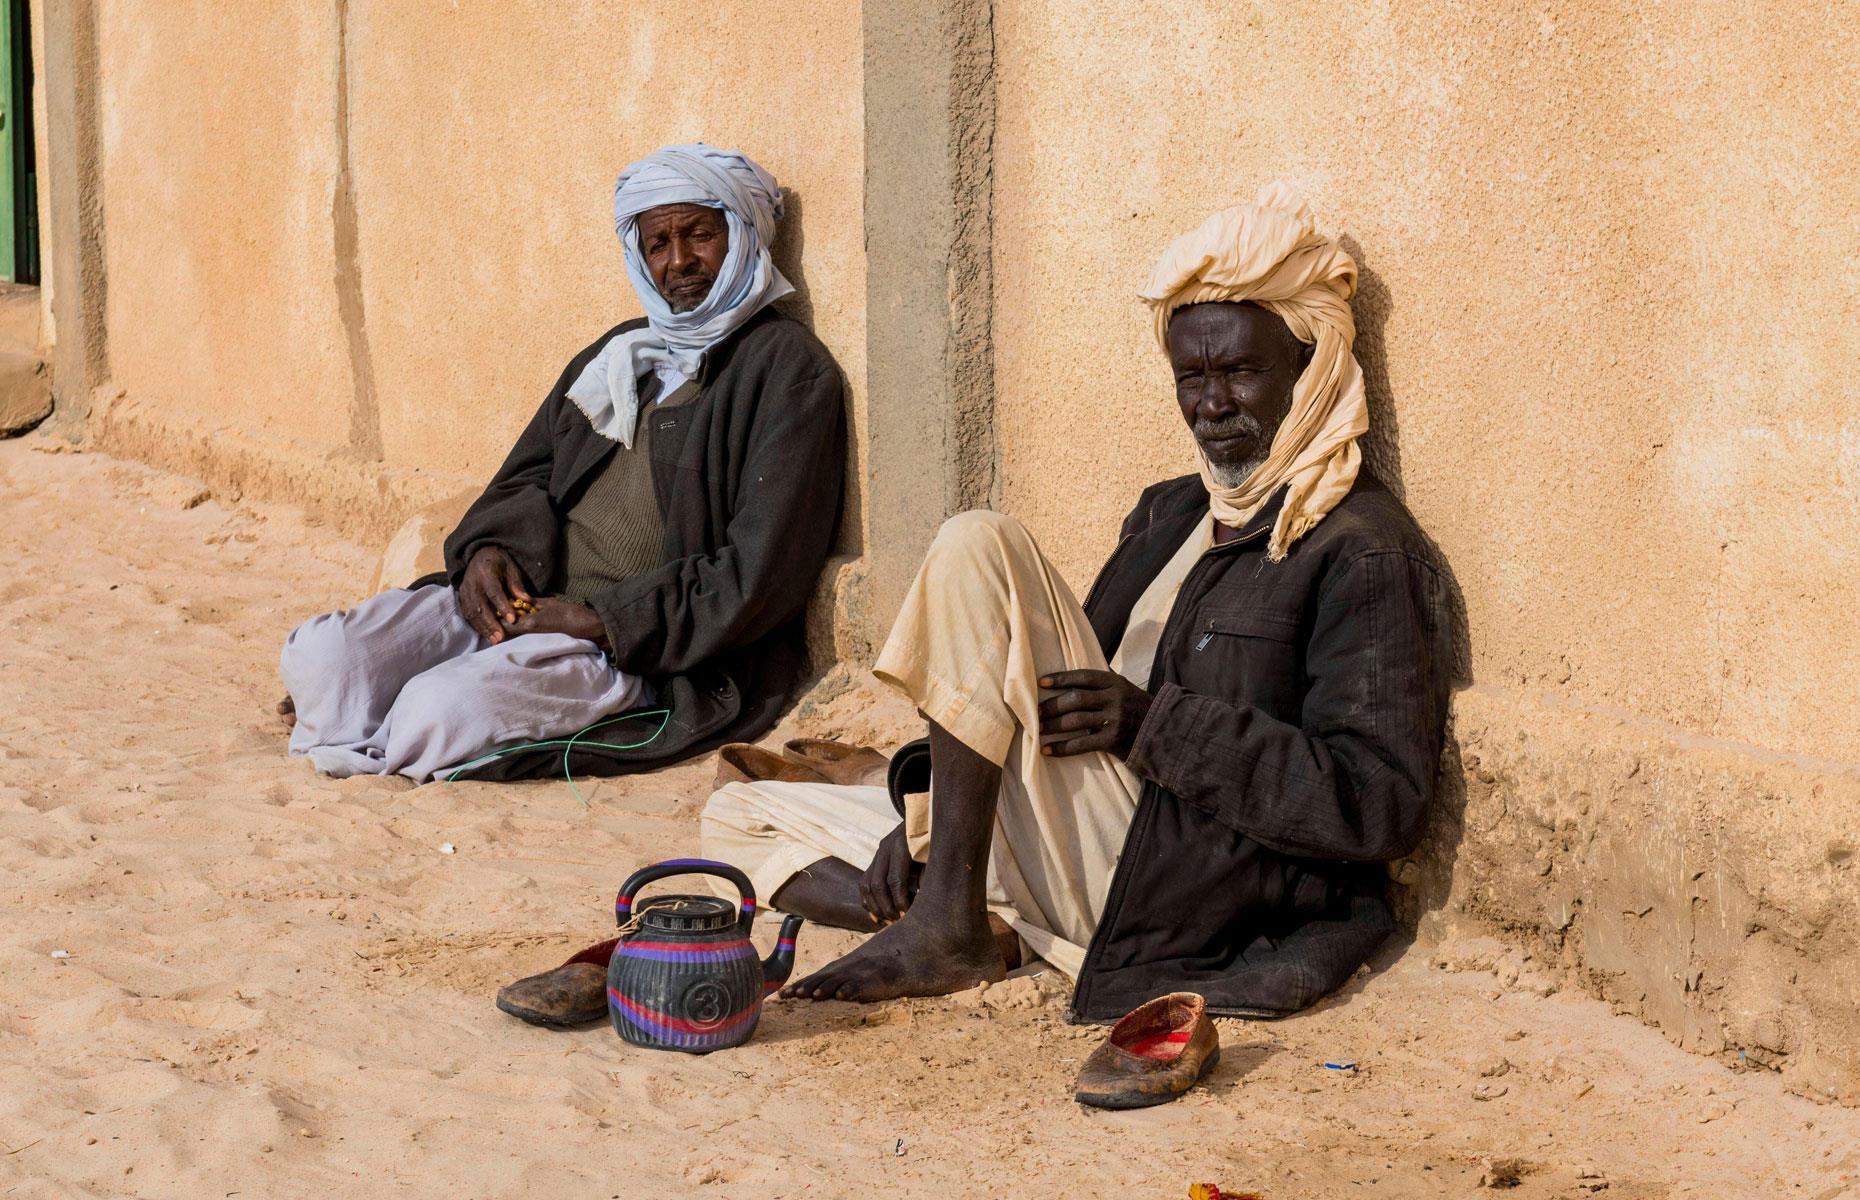 <p>Life expectancy in Chad is expected to be the lowest in the world in 2050 at 58.3 years, but this is a marked improvement on the current figure of 53.7 and massively better than the 1950 average of just 36.2.</p>  <p>Chad has long been beset by civil conflict, extreme poverty, and widespread malnutrition. It has one of the world's highest infant mortality rates and infectious diseases such as malaria and HIV are rife. Fortunately, the population of the country will likely benefit over the next 27 years from medical advancements including the first-ever malaria vaccine, improving living standards, and better healthcare availability.</p>